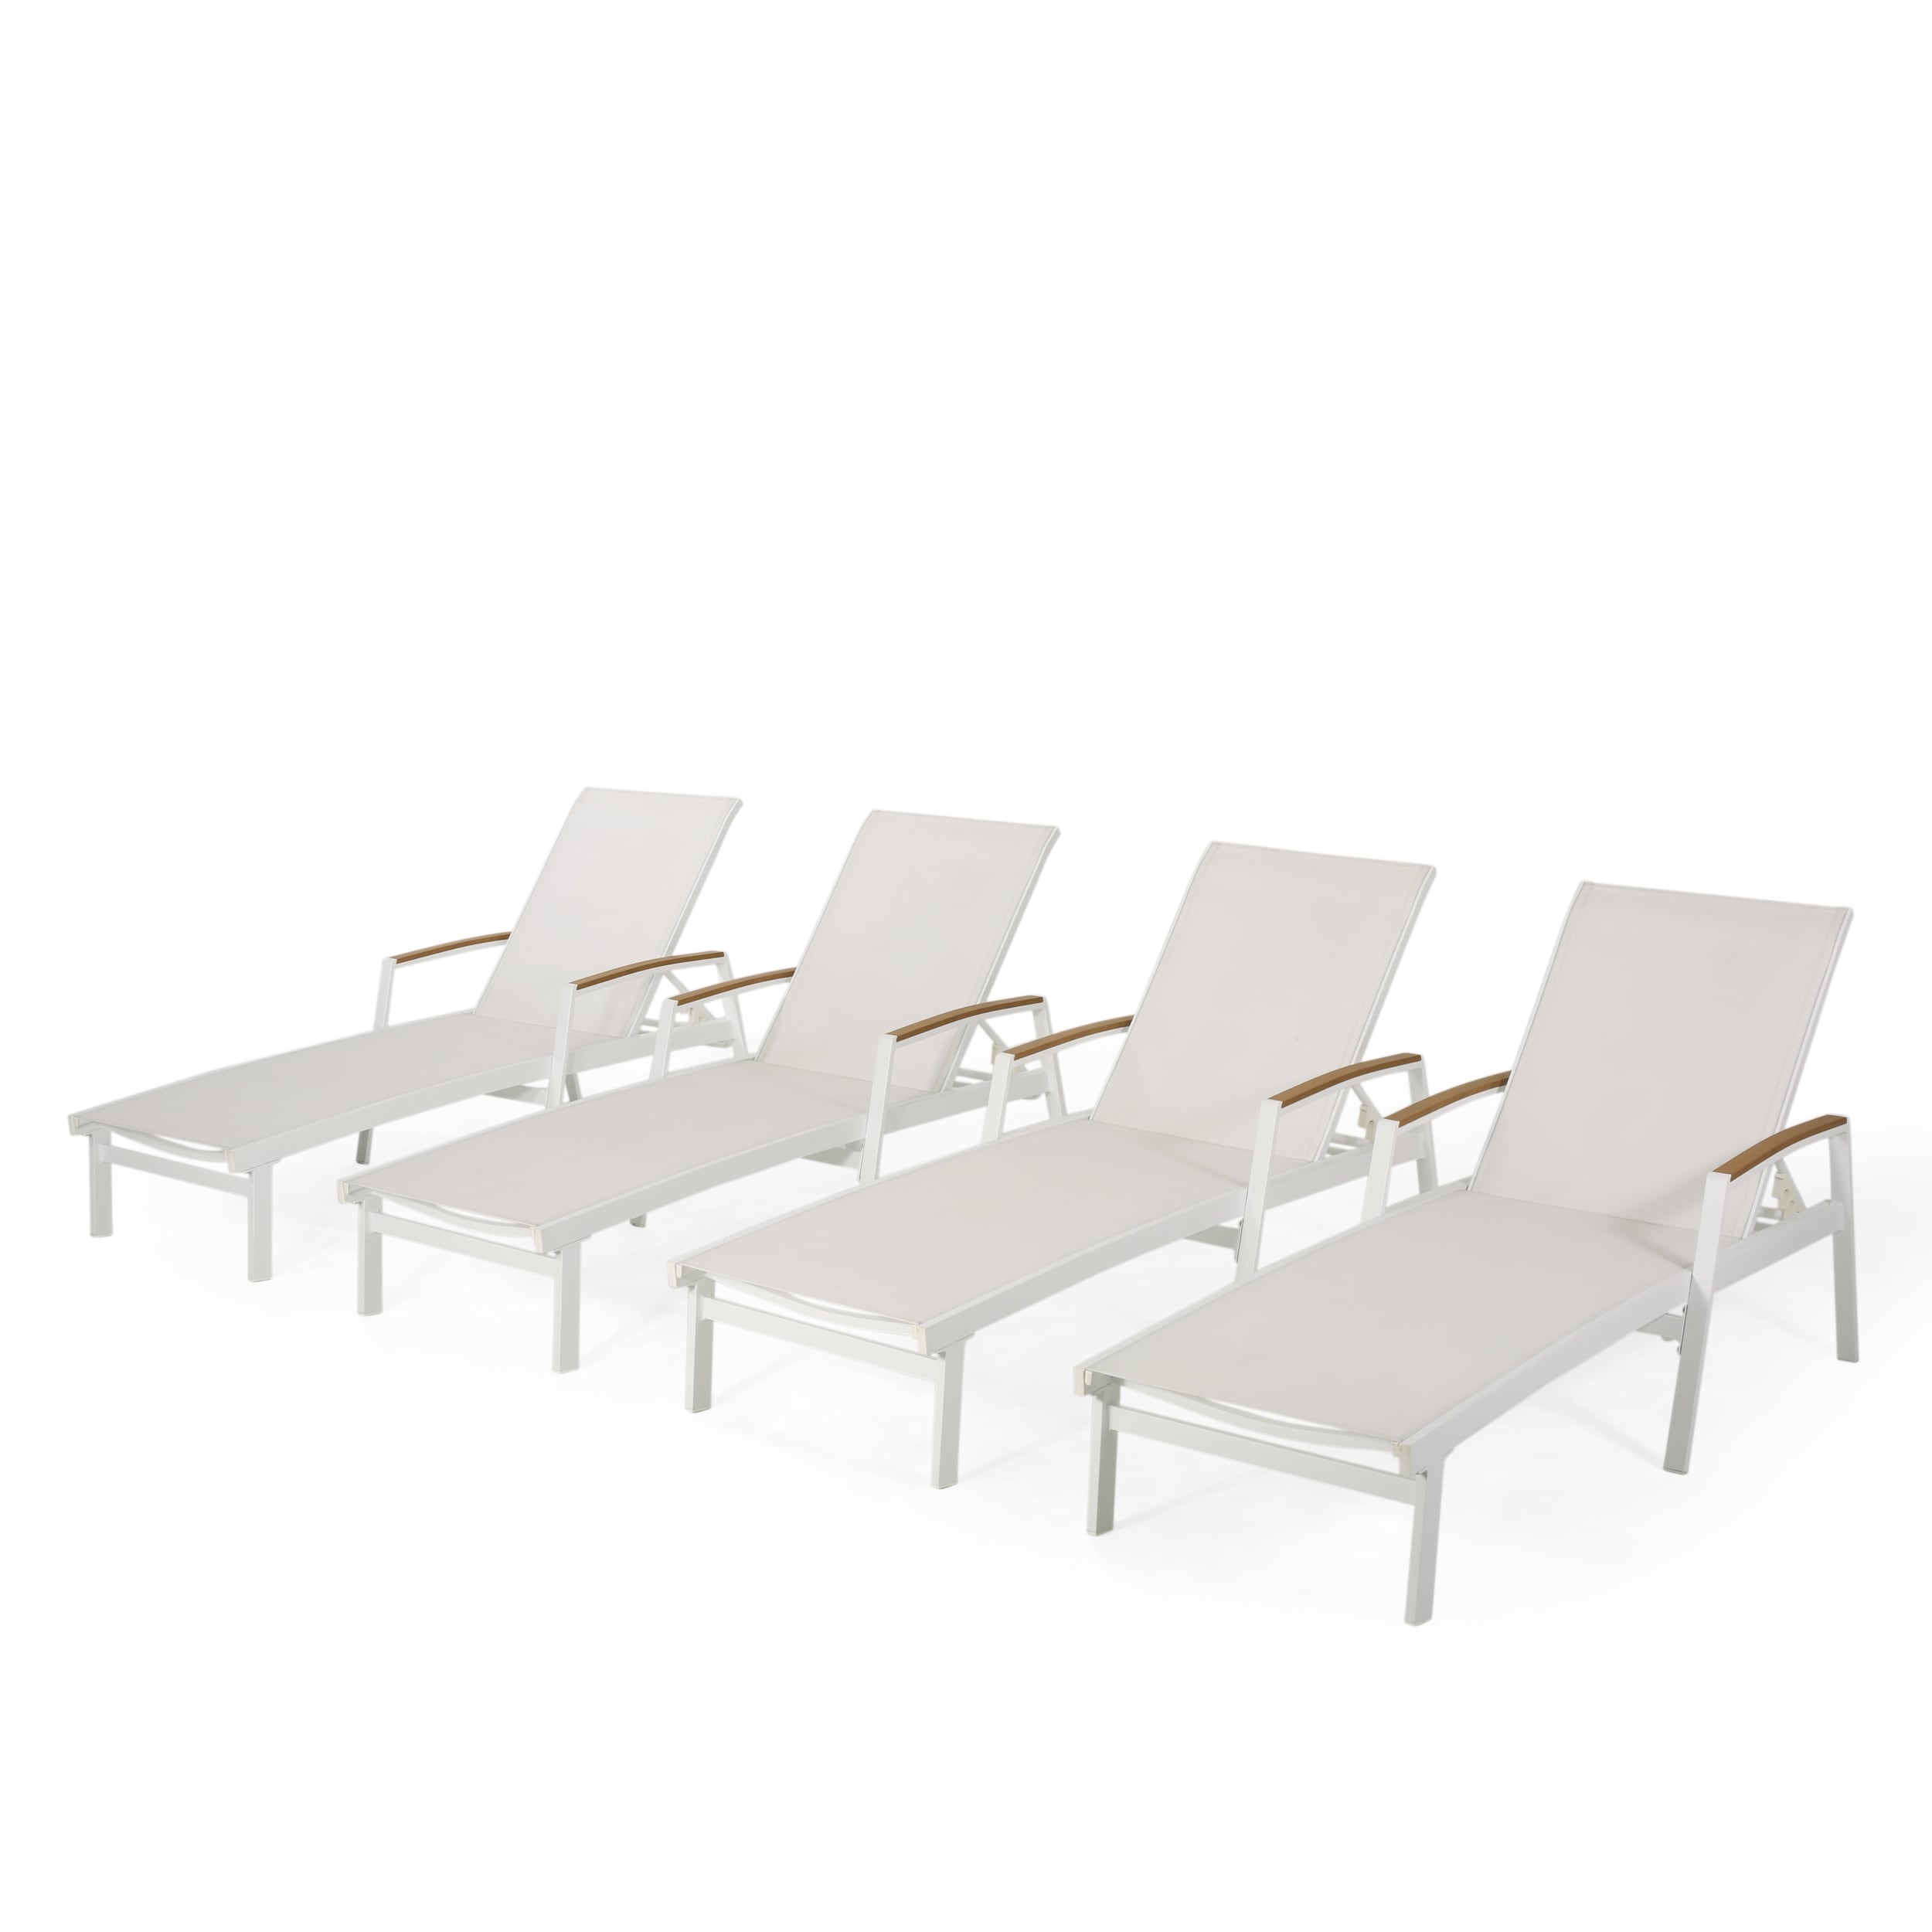 Oxton Outdoor Aluminum Chaise Lounge (set Of 4) By Christopher Knight Home